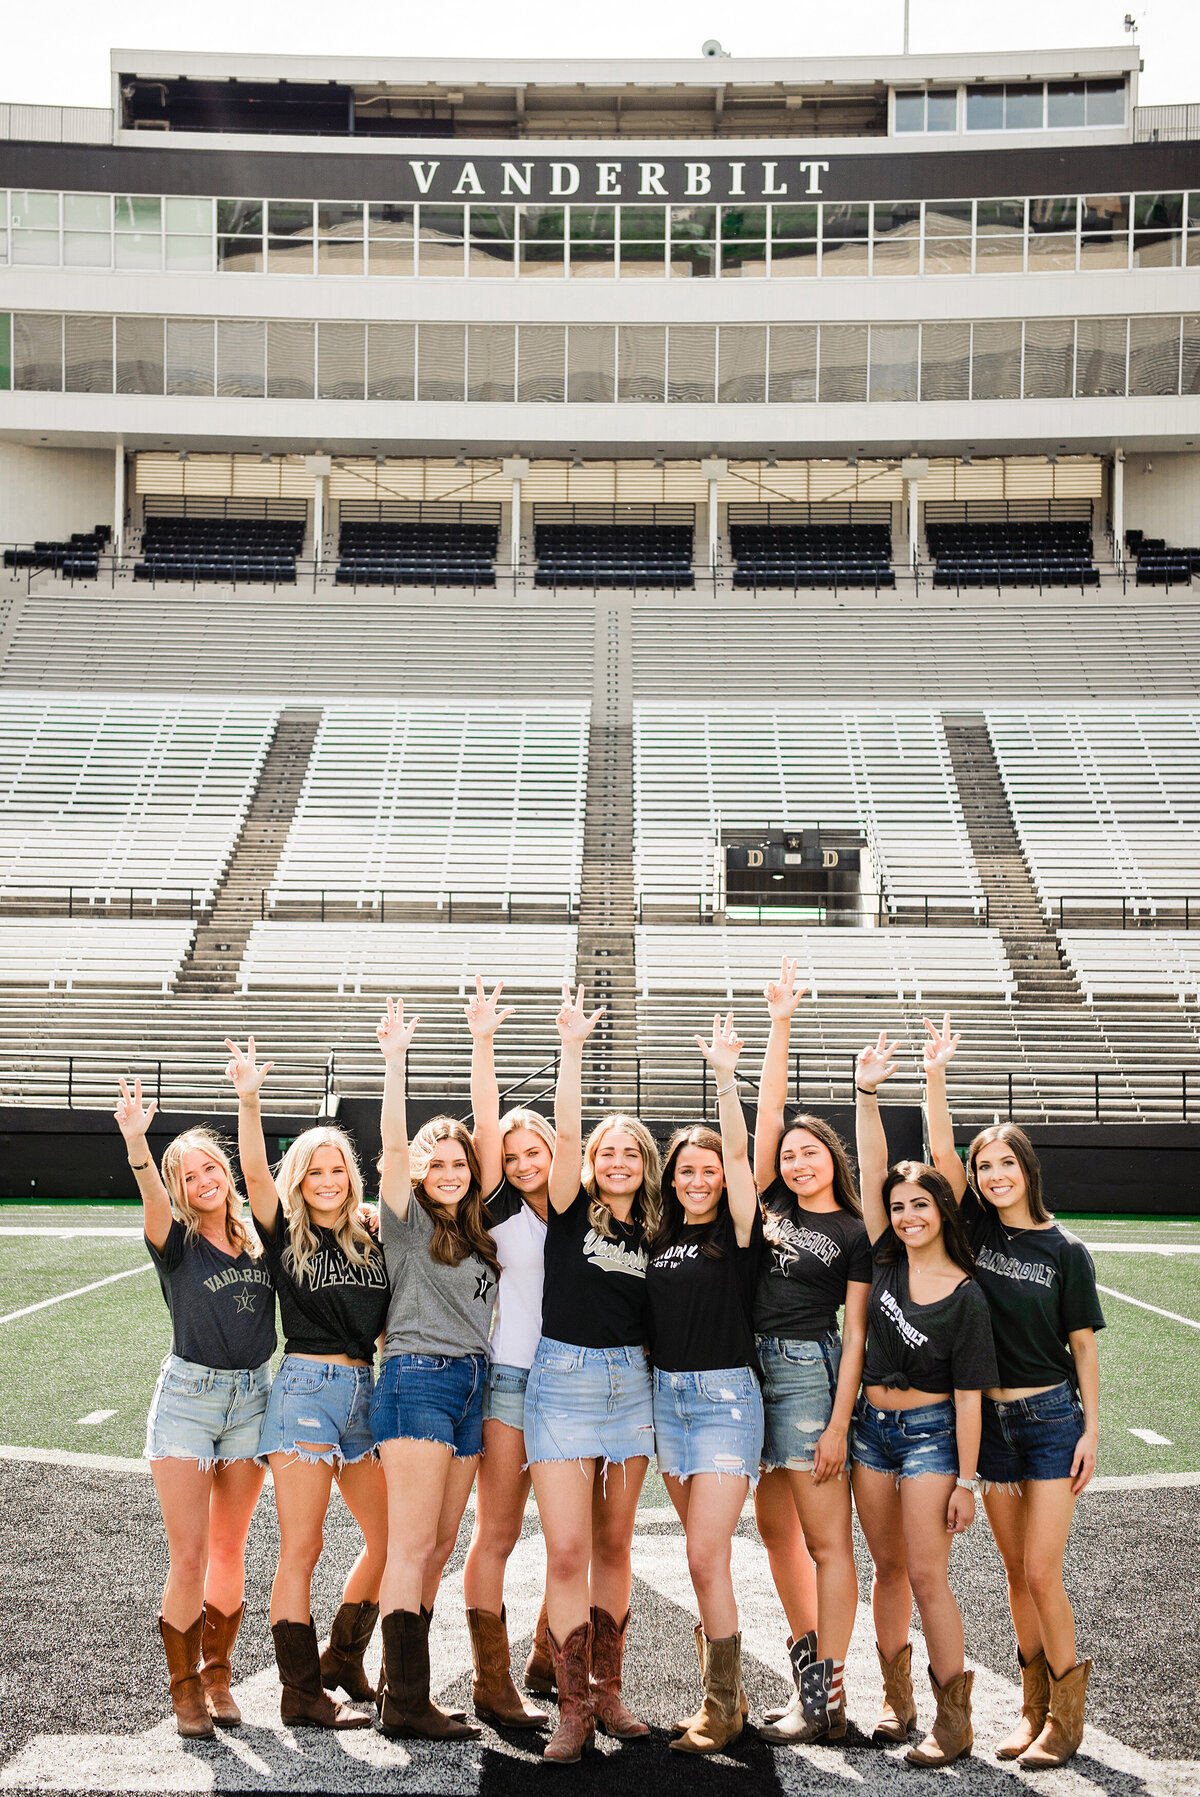 Group of senior girls wearing college shirts and jean skirts standing on football field throwing Vanderbilt anchor down hand sign over heads